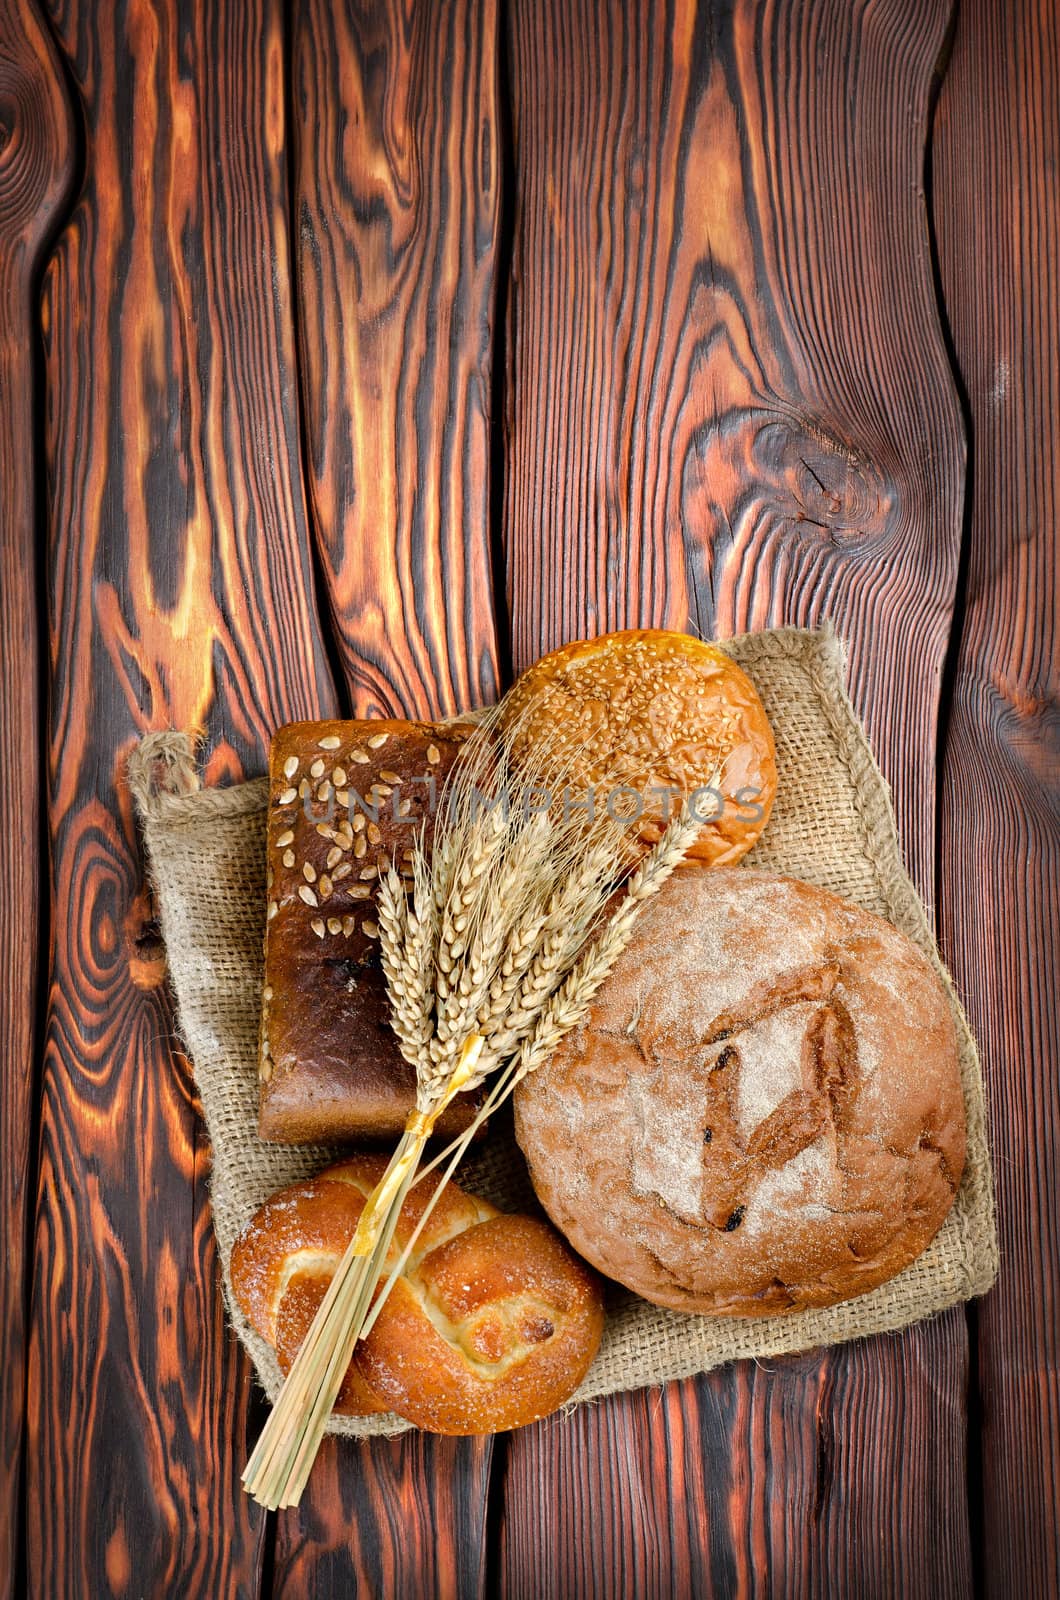 Bread and wheat on a wooden background